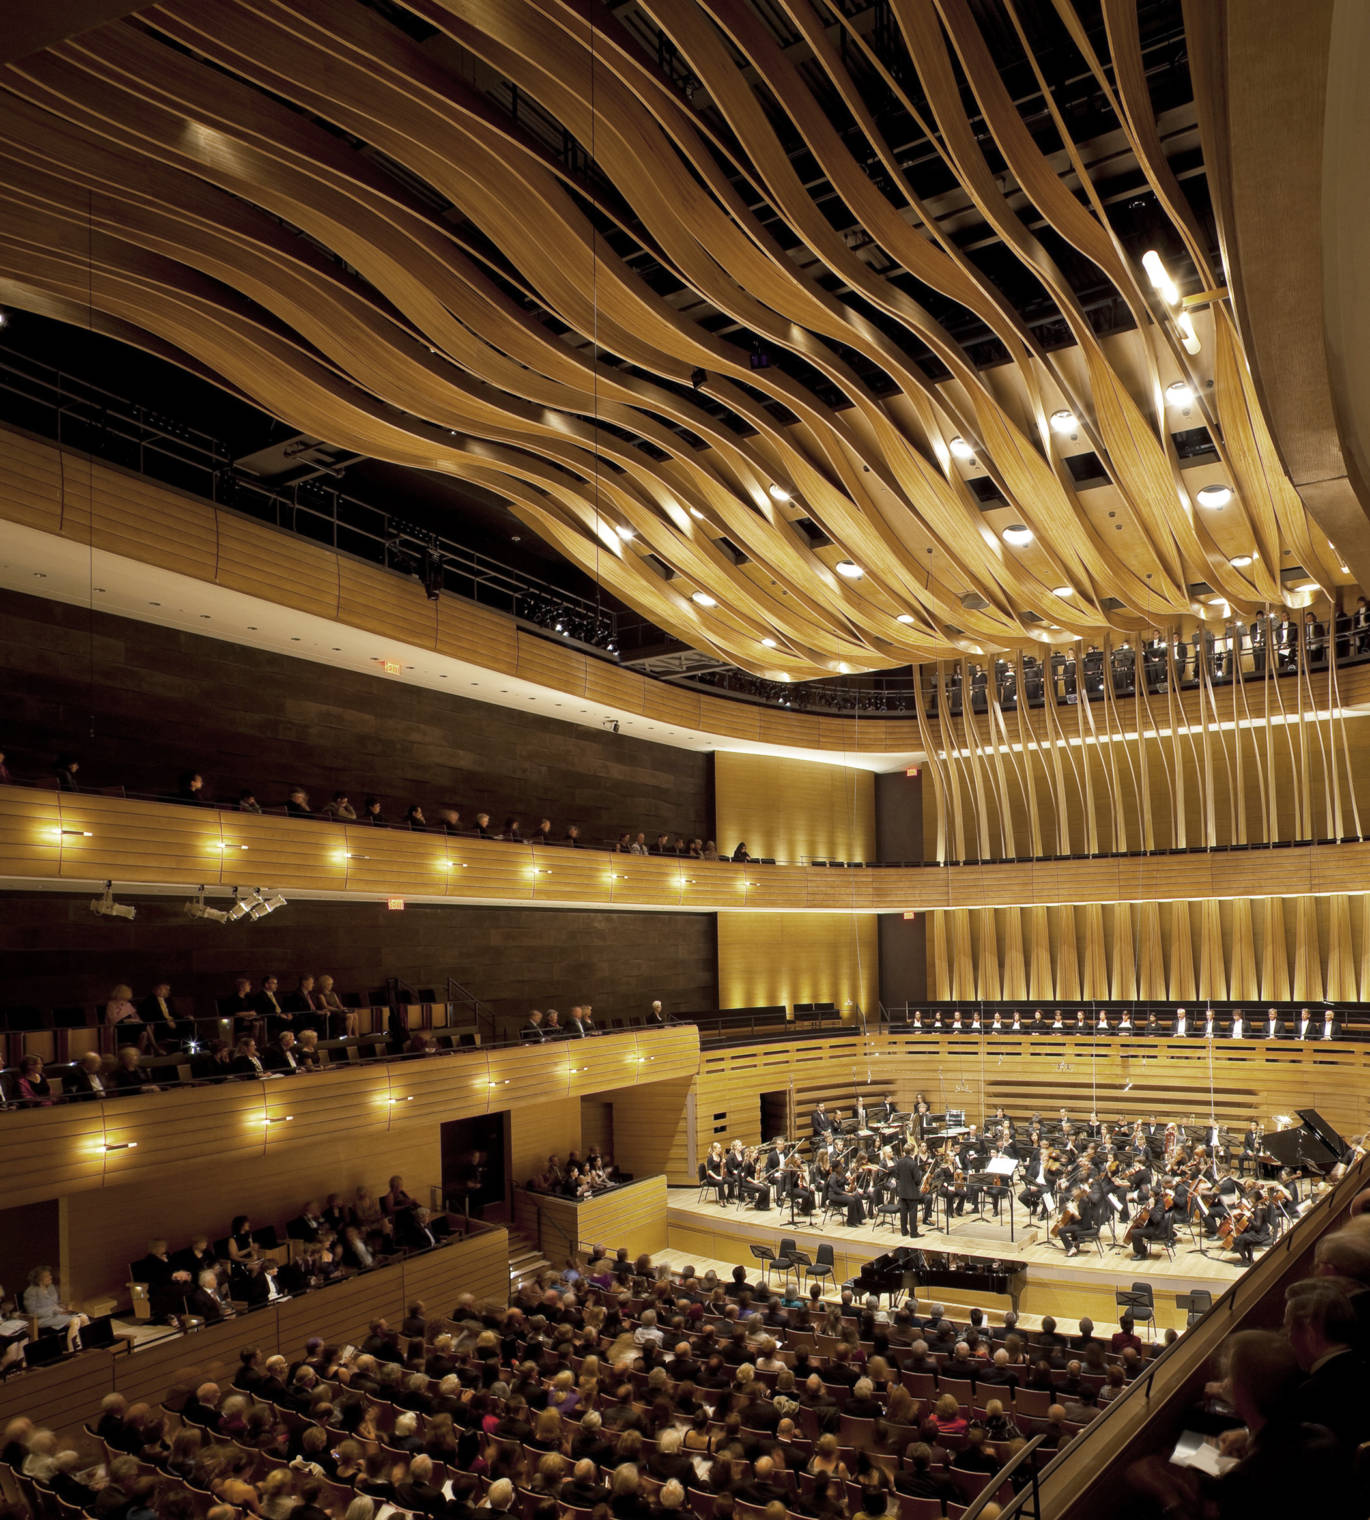 Royal Conservatory of Music Koerner Hall and orchestra